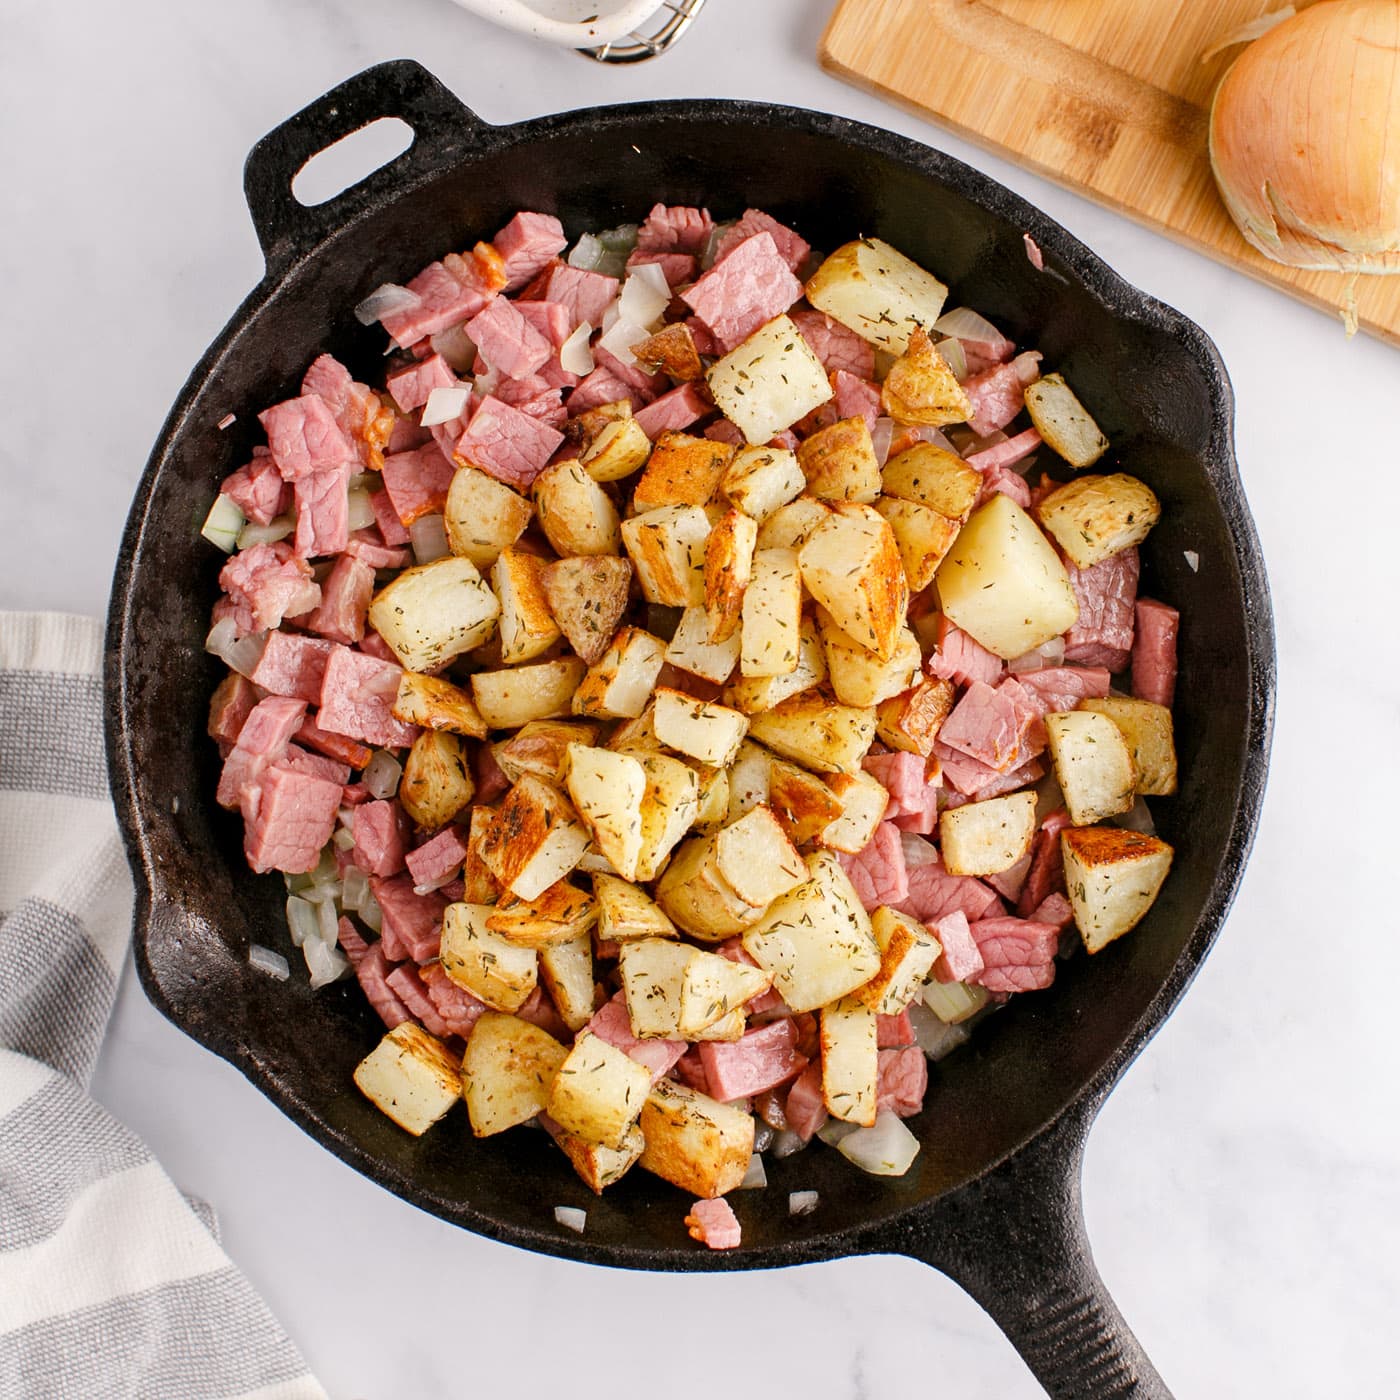 cubed potatoes, corned beef, and onions in a skillet